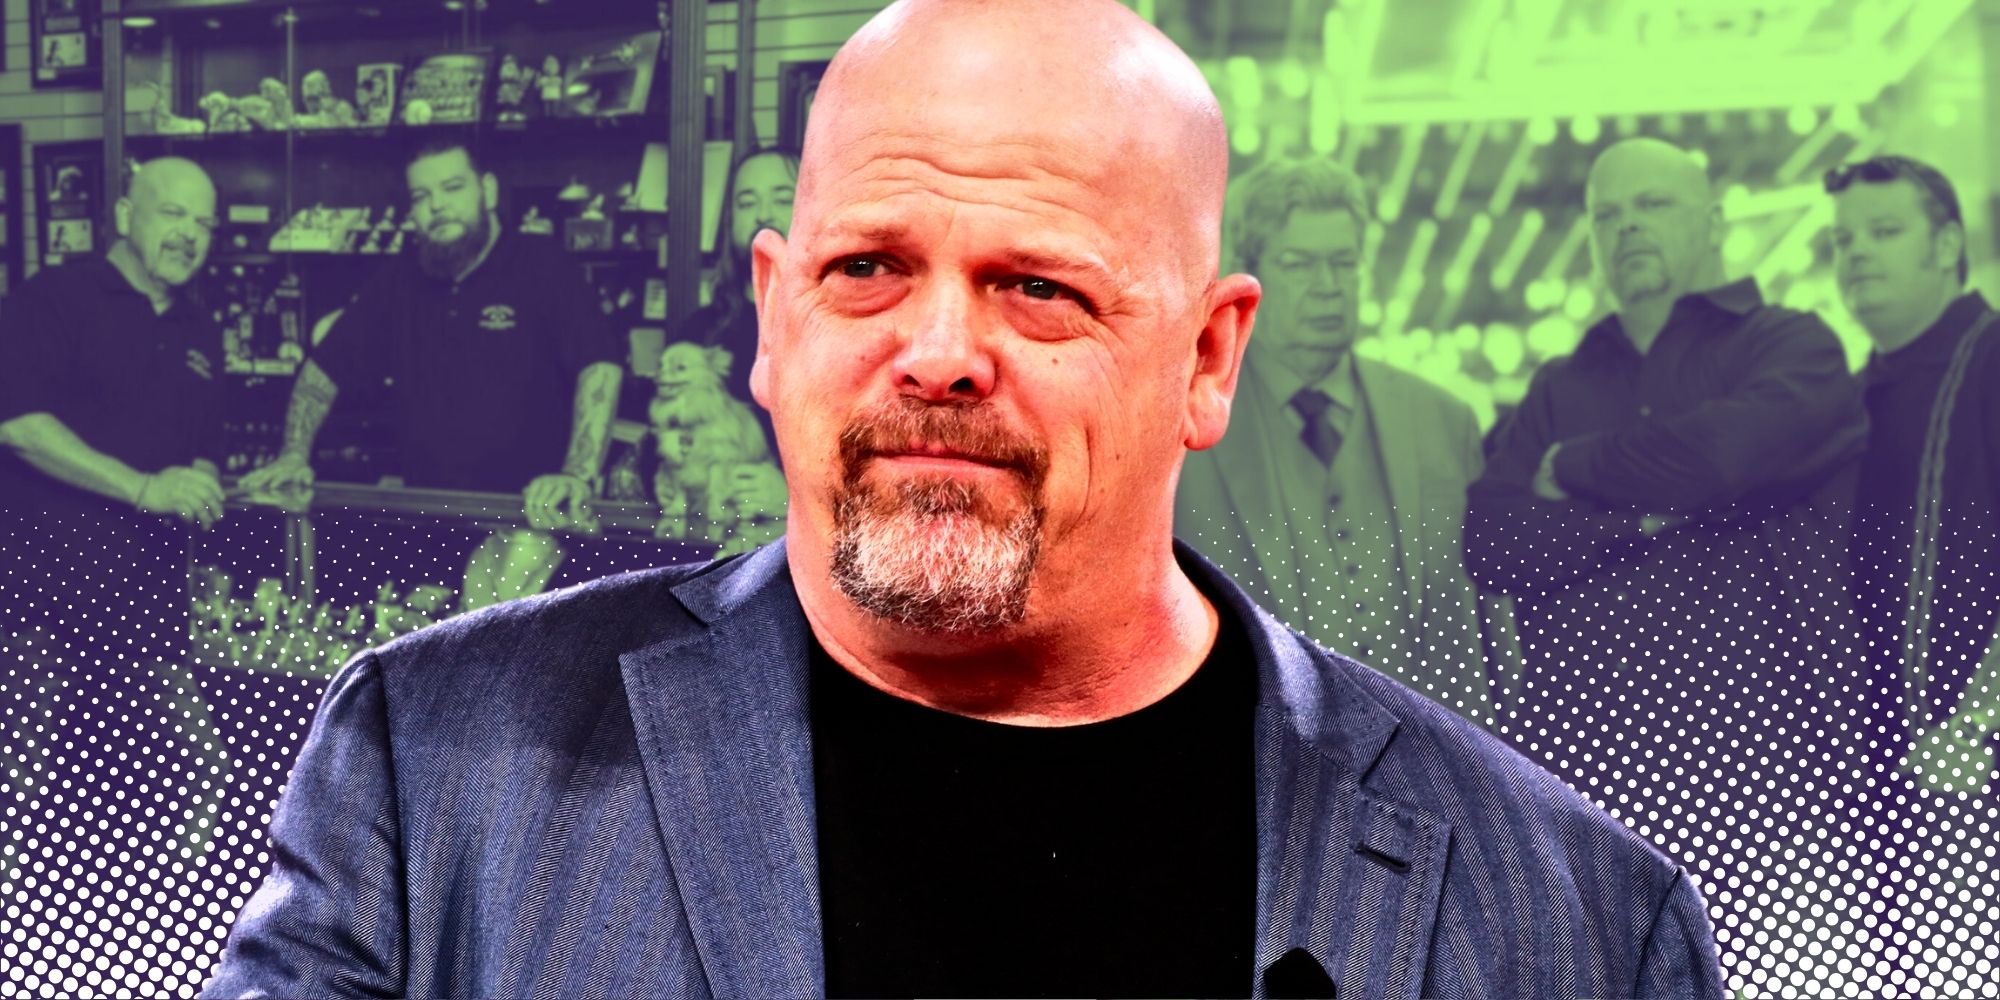 Pawn Stars Rick Harrison with pained expression wearing a grey blazer and black t-shirt outfit with faded photos of the show's promo behind him